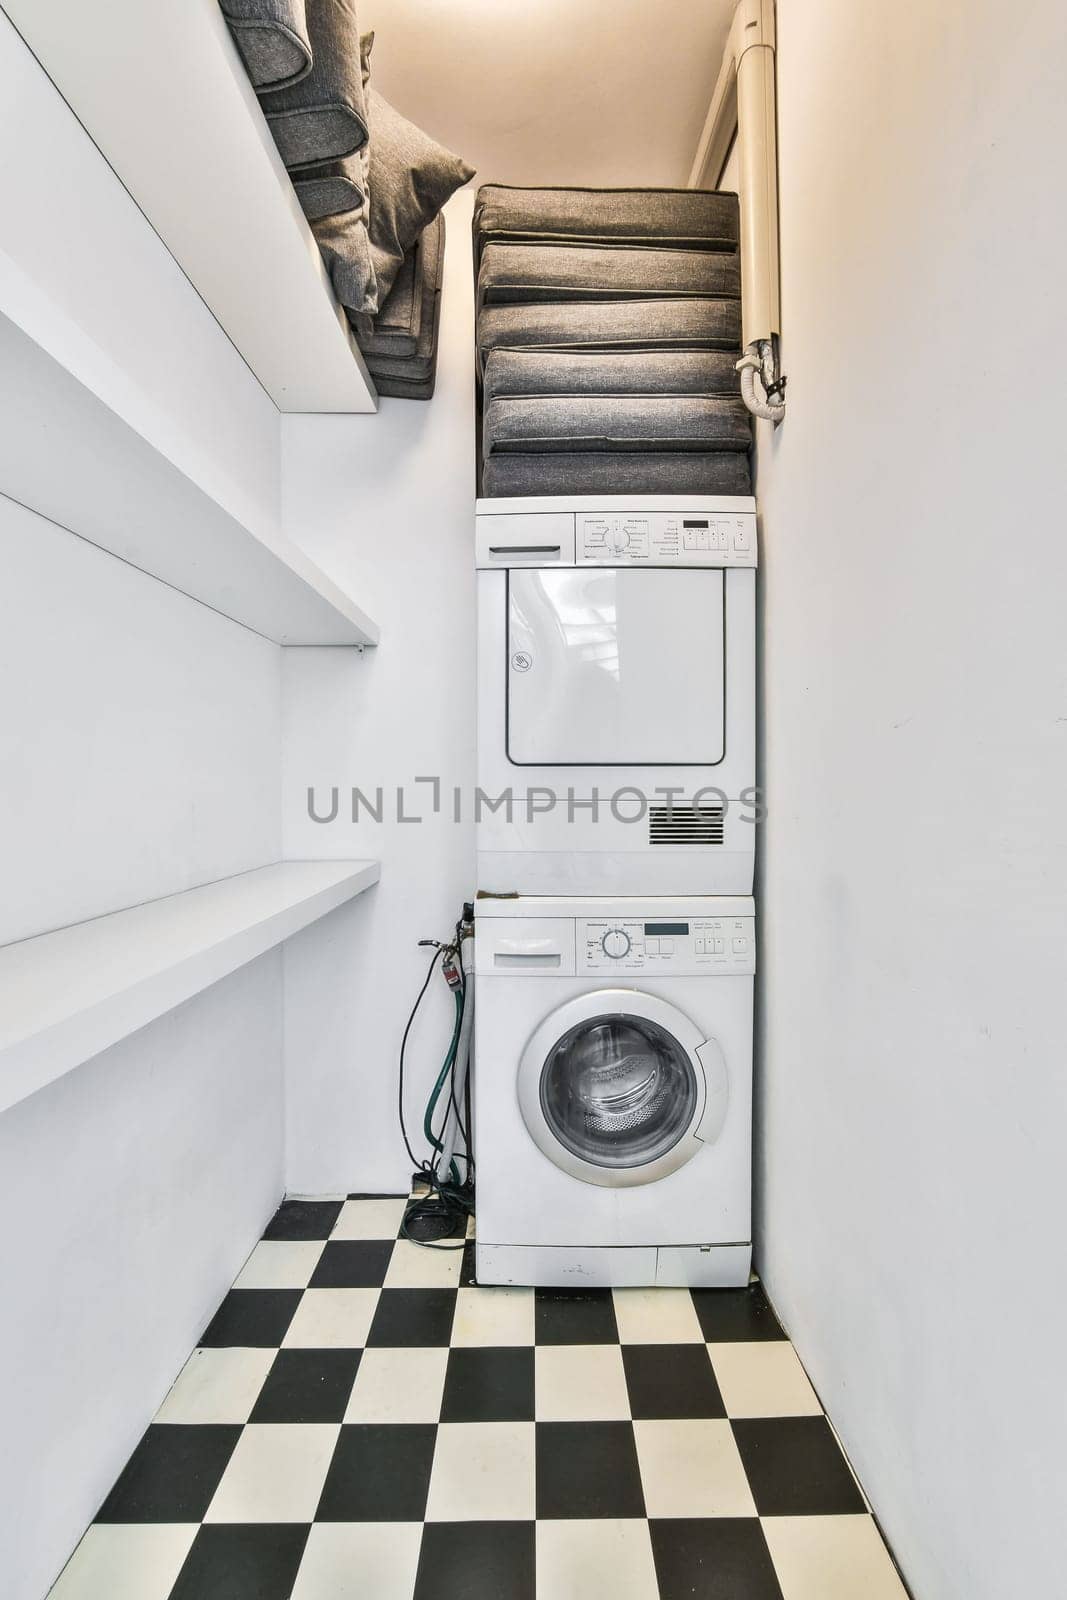 a laundry room with a washer and dryer on the floor in black and white checkereded tiles